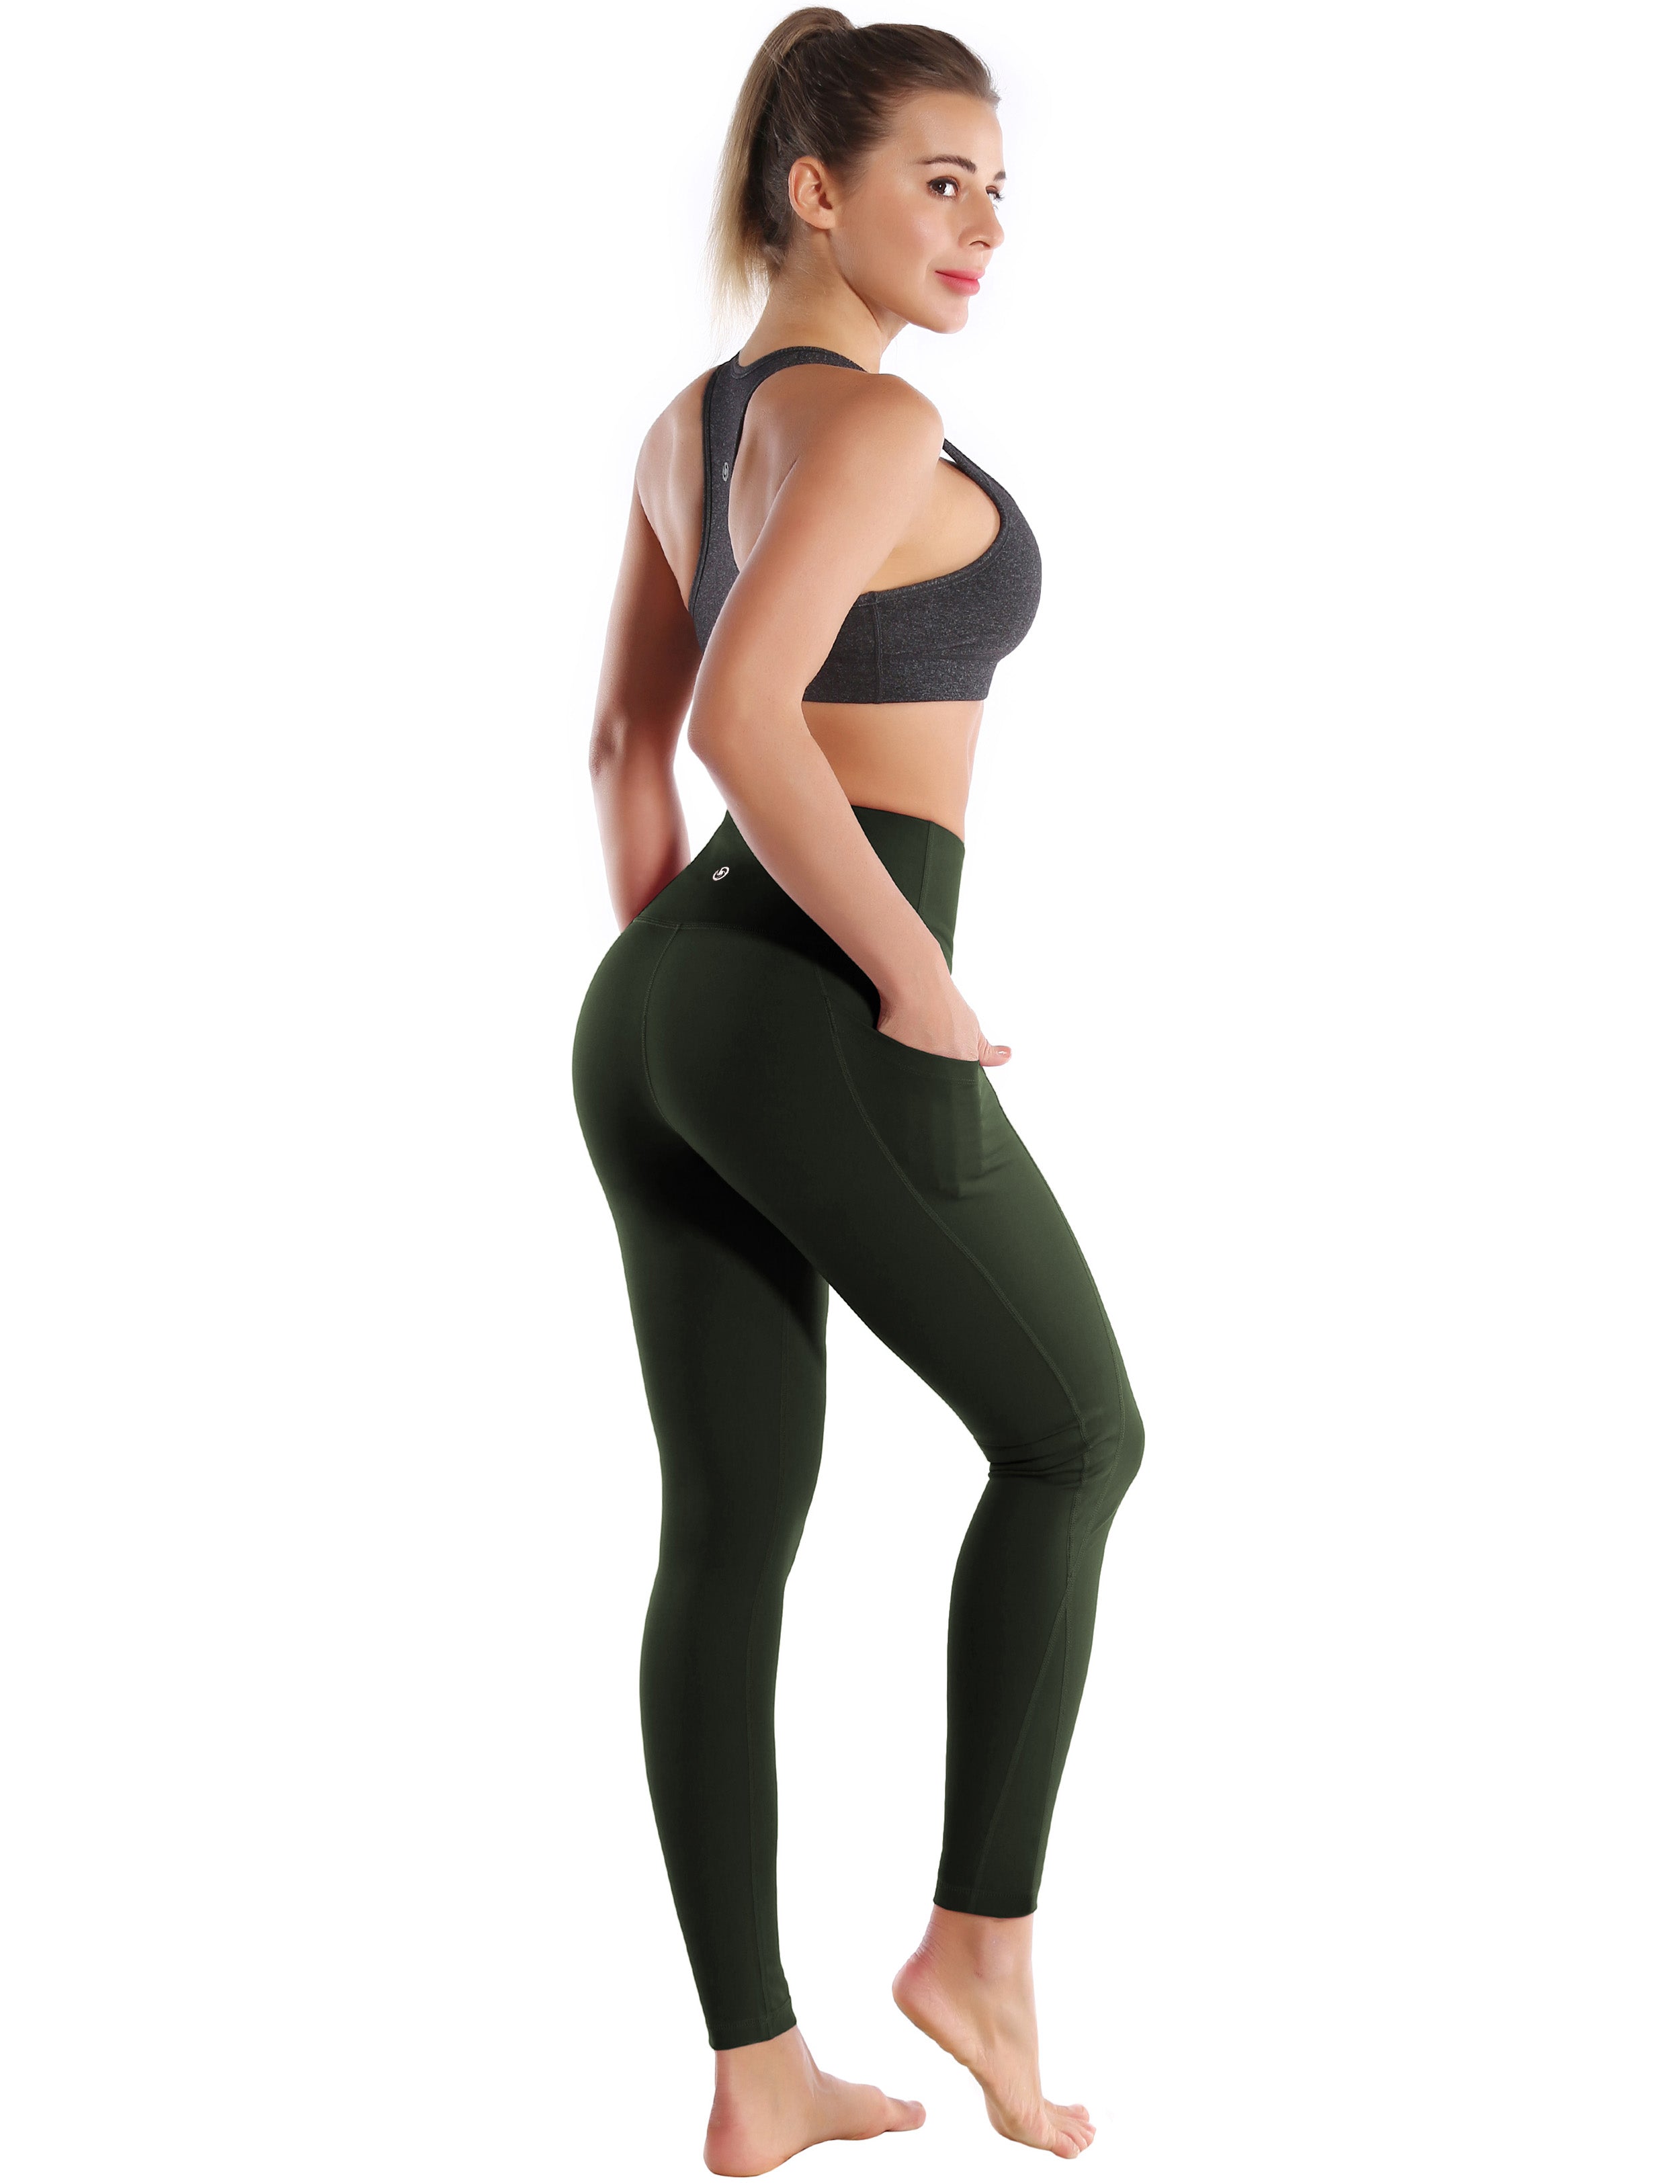 High Waist Side Pockets Pilates Pants olivegray 75% Nylon, 25% Spandex Fabric doesn't attract lint easily 4-way stretch No see-through Moisture-wicking Tummy control Inner pocket